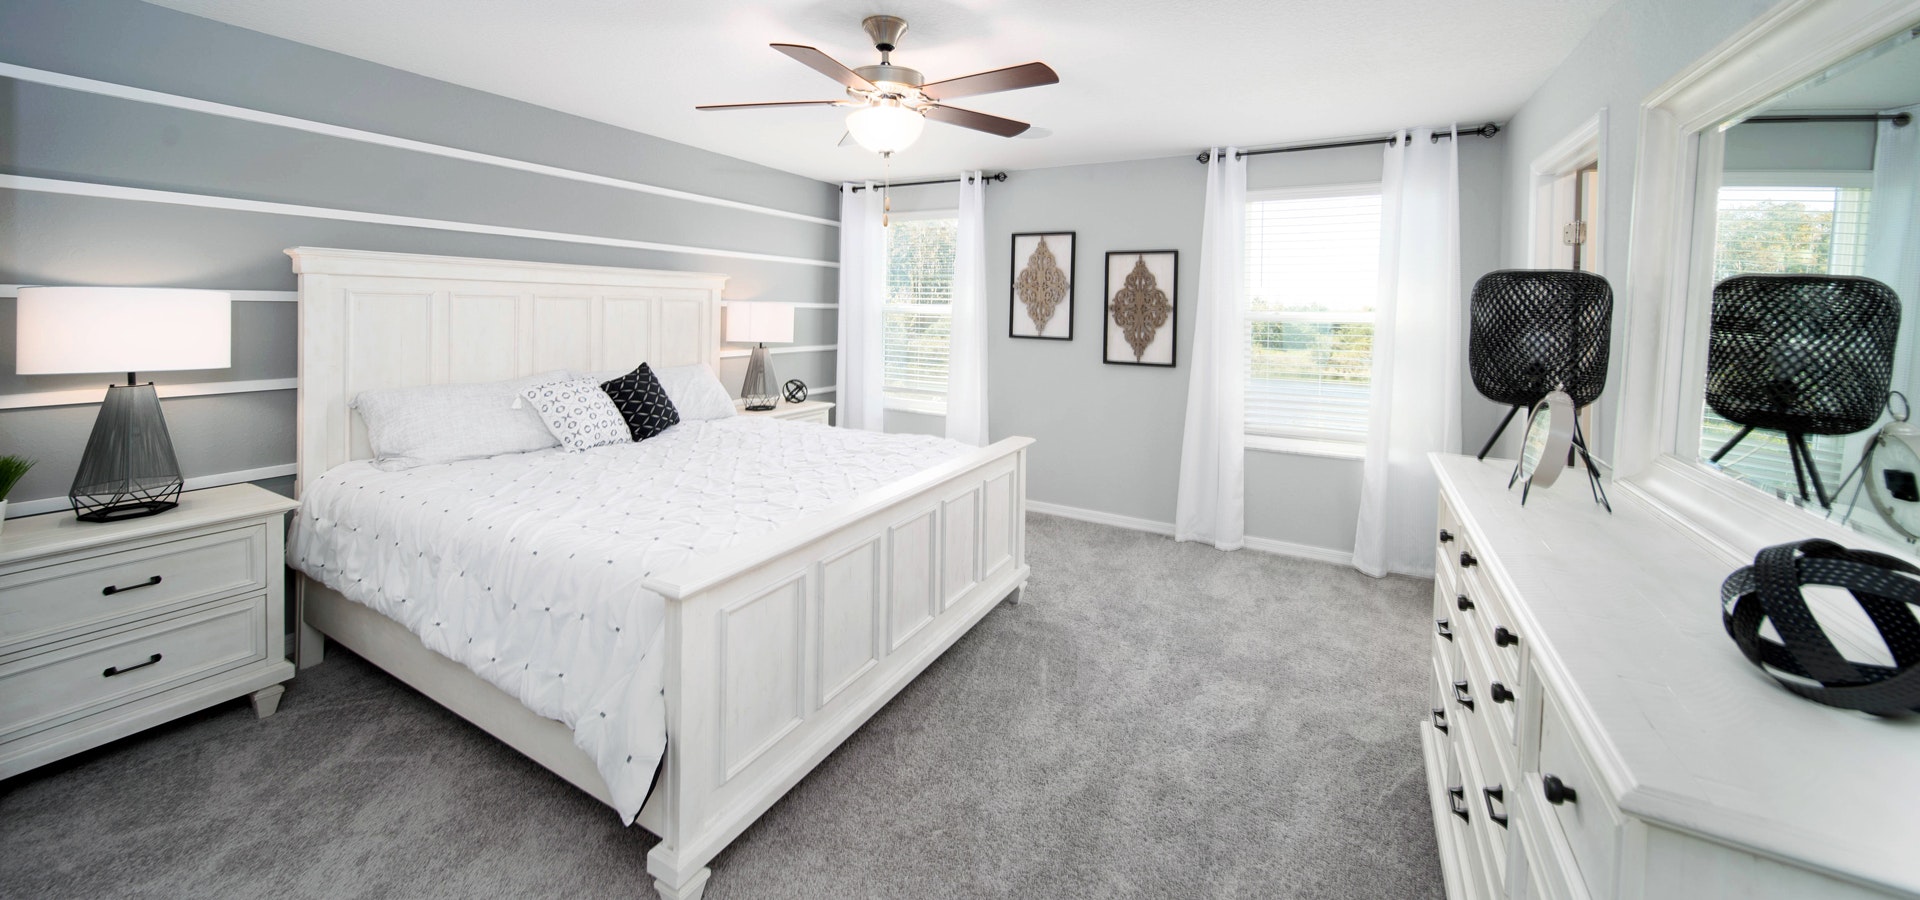 Bedroom in a new townhome for sale in Plant City, FL